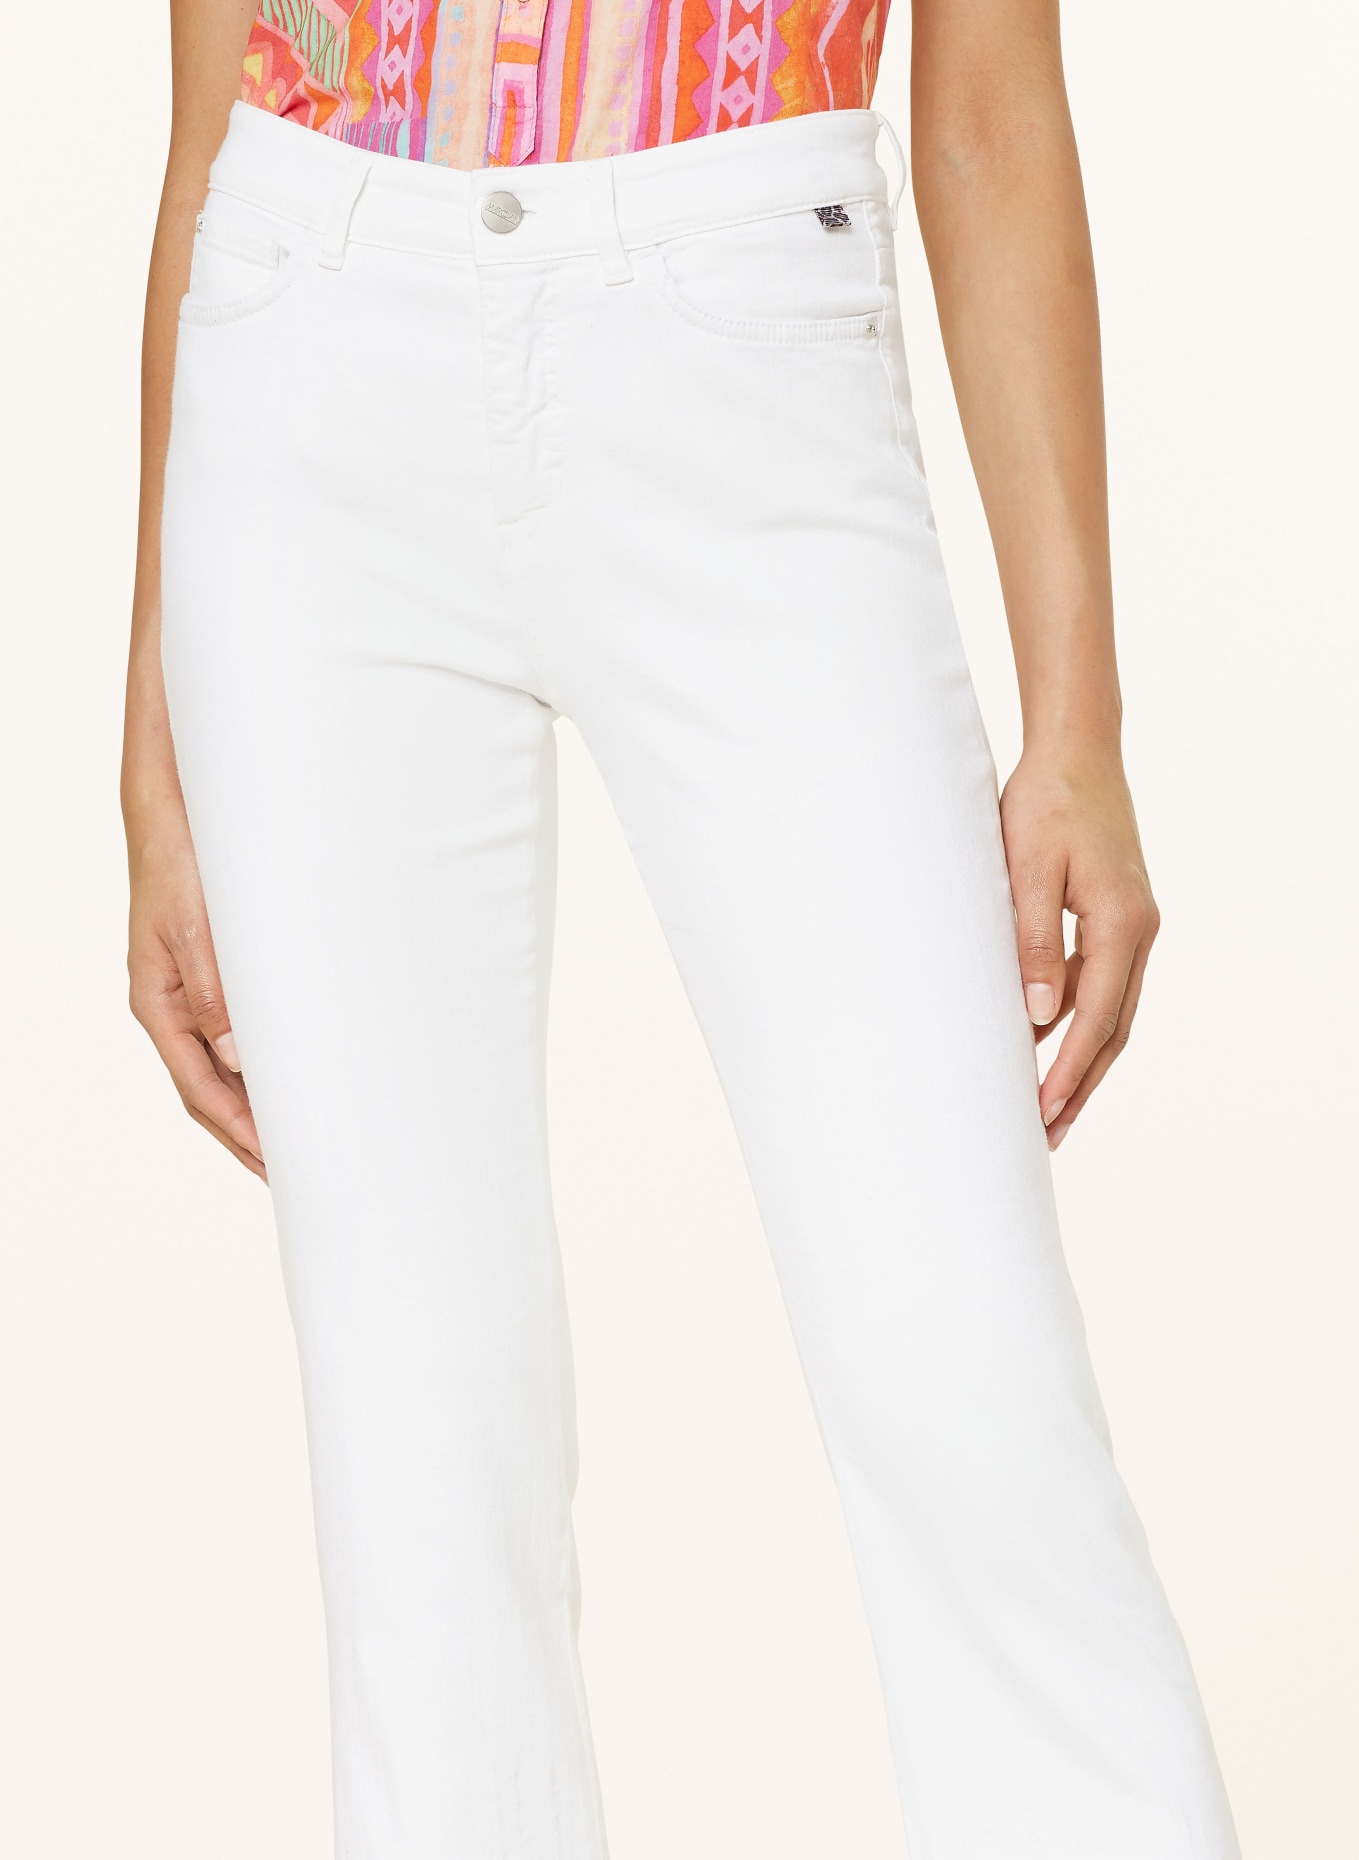 MARC CAIN 7/8 jeans FORLI with sequins, Color: 100 WHITE (Image 5)